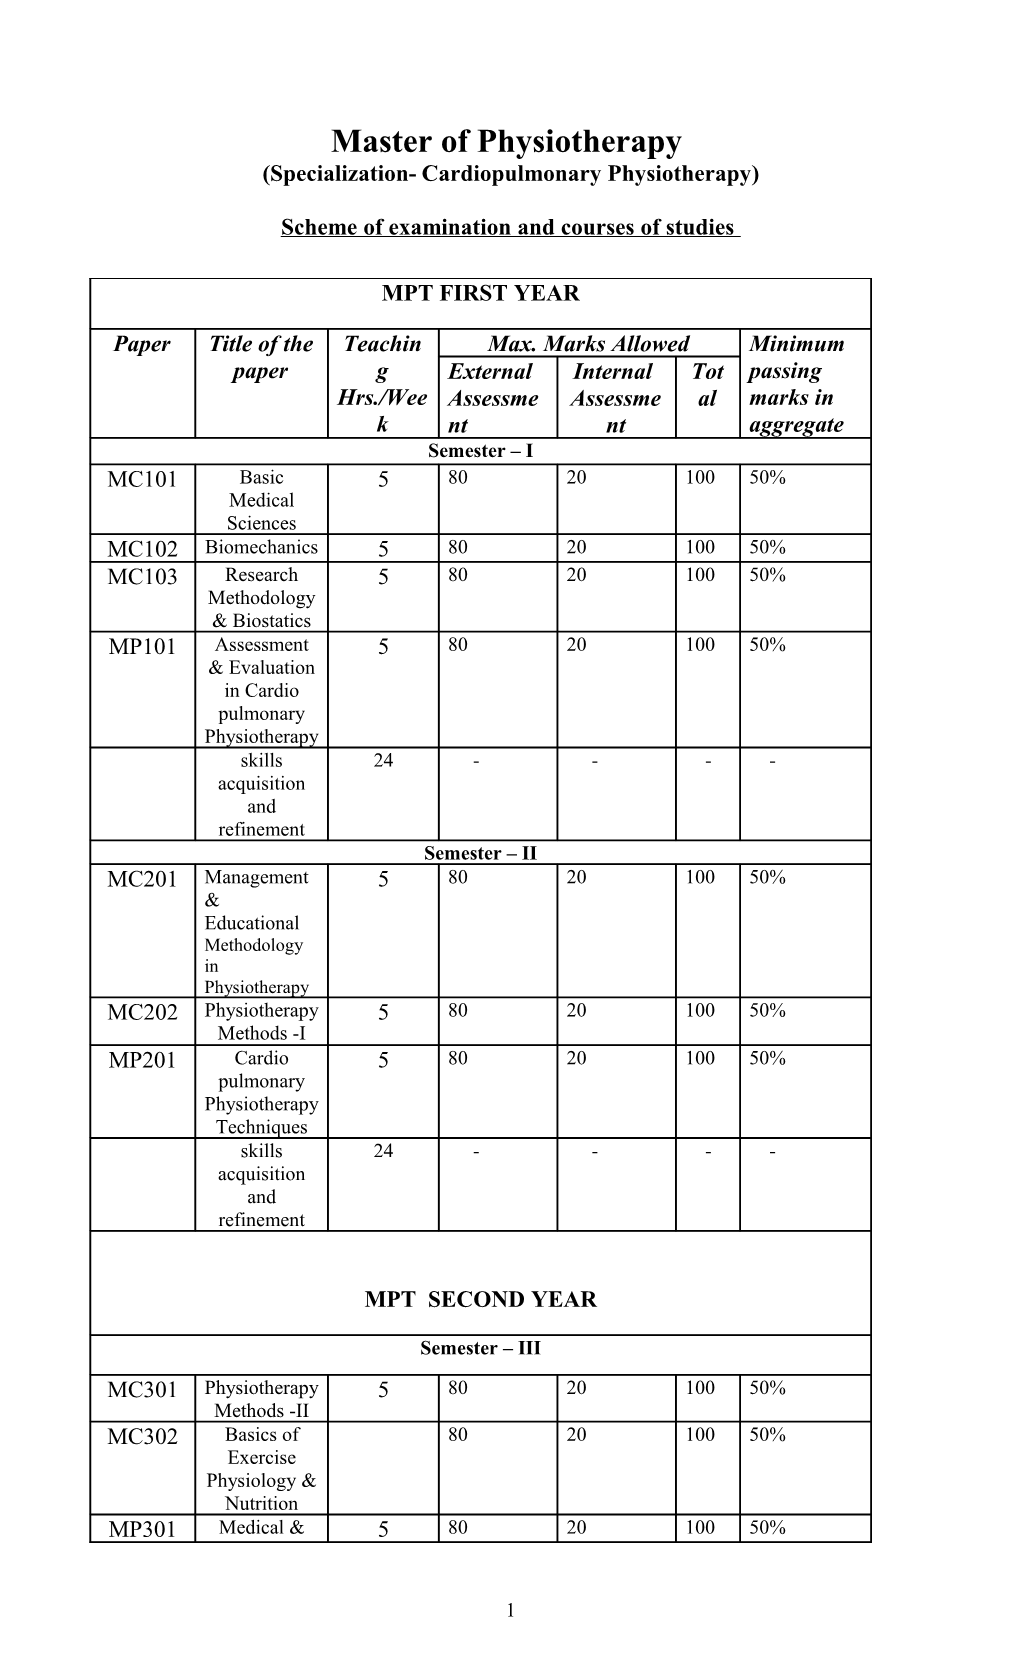 Scheme of Examination and Courses of Studies